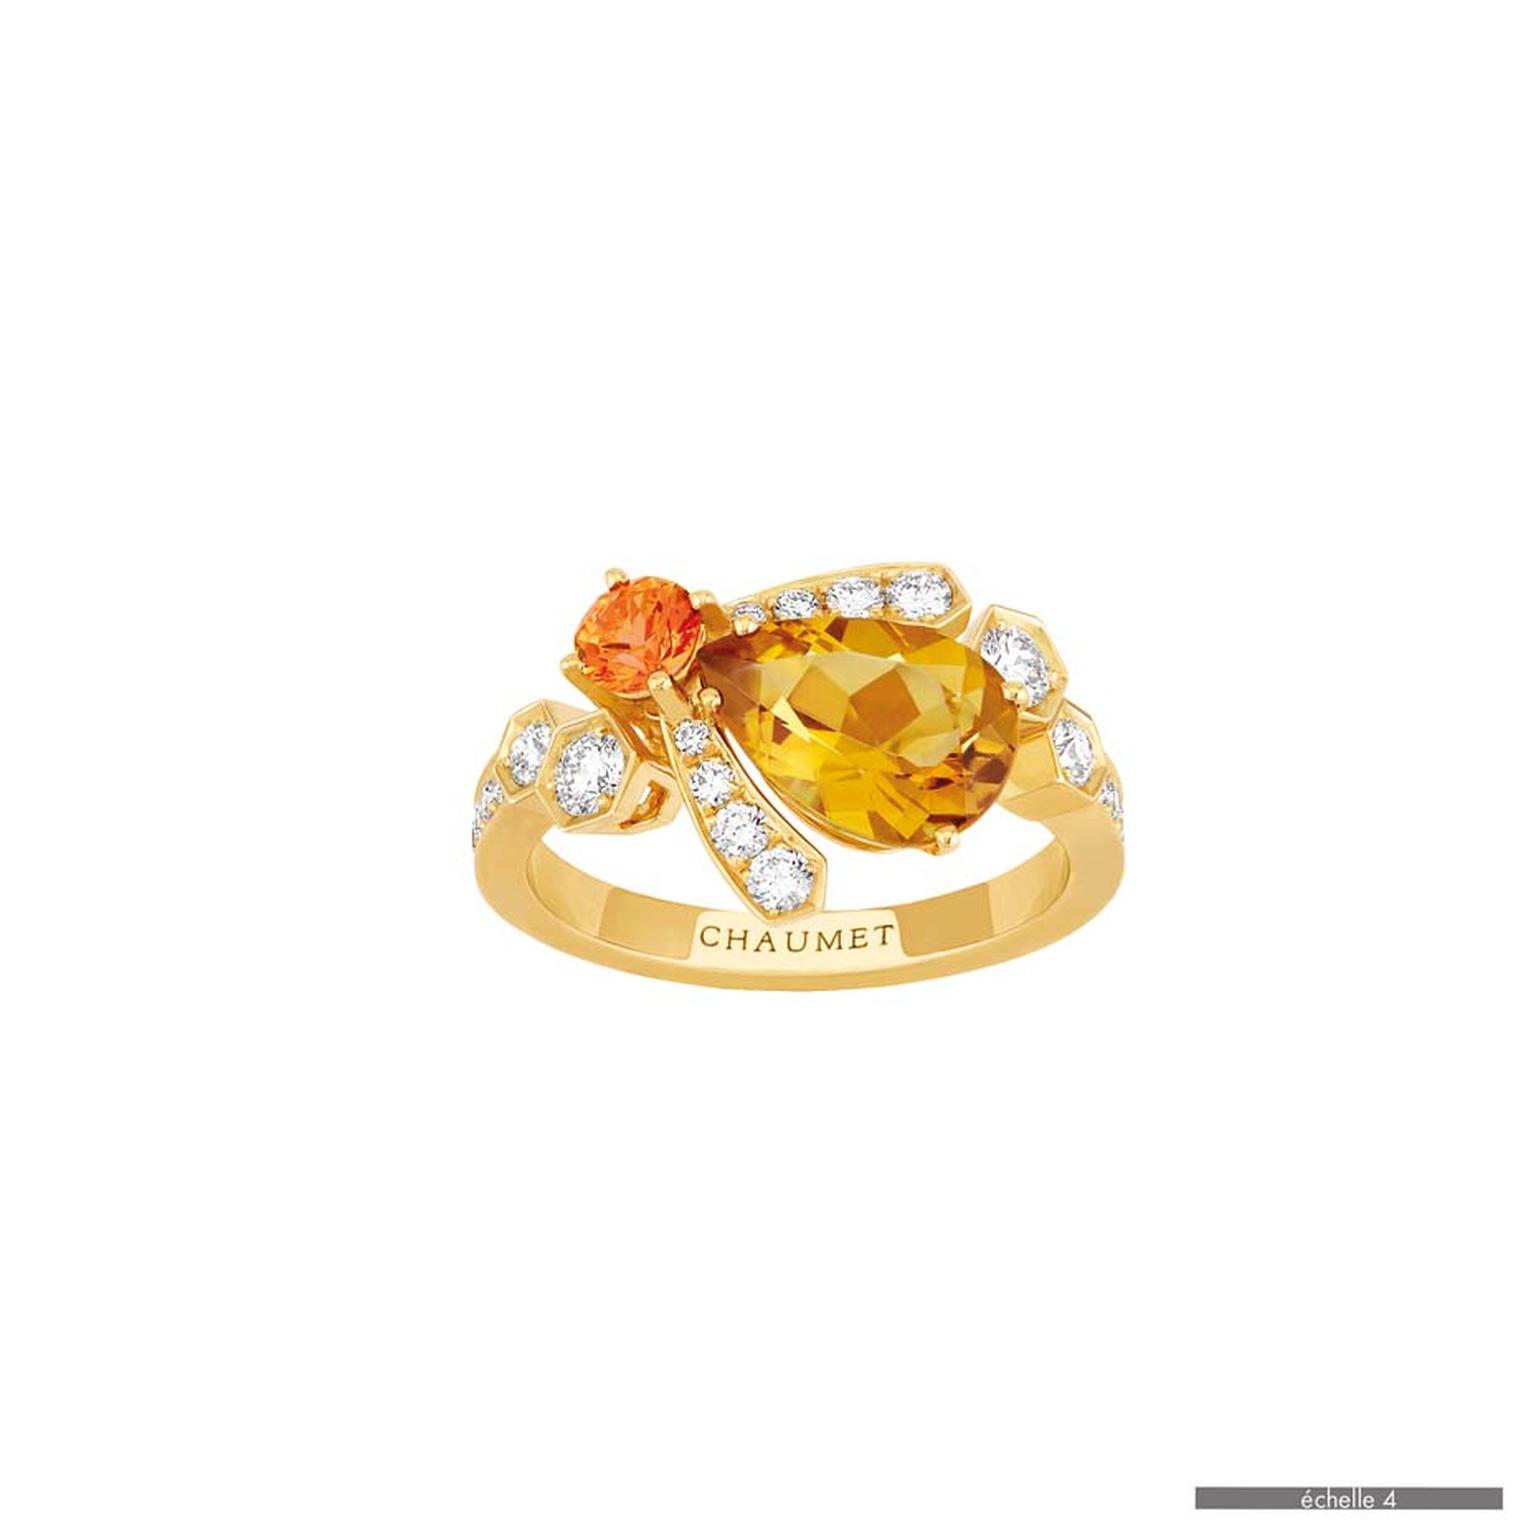 Bees_Chaumet_gold ring.jpg